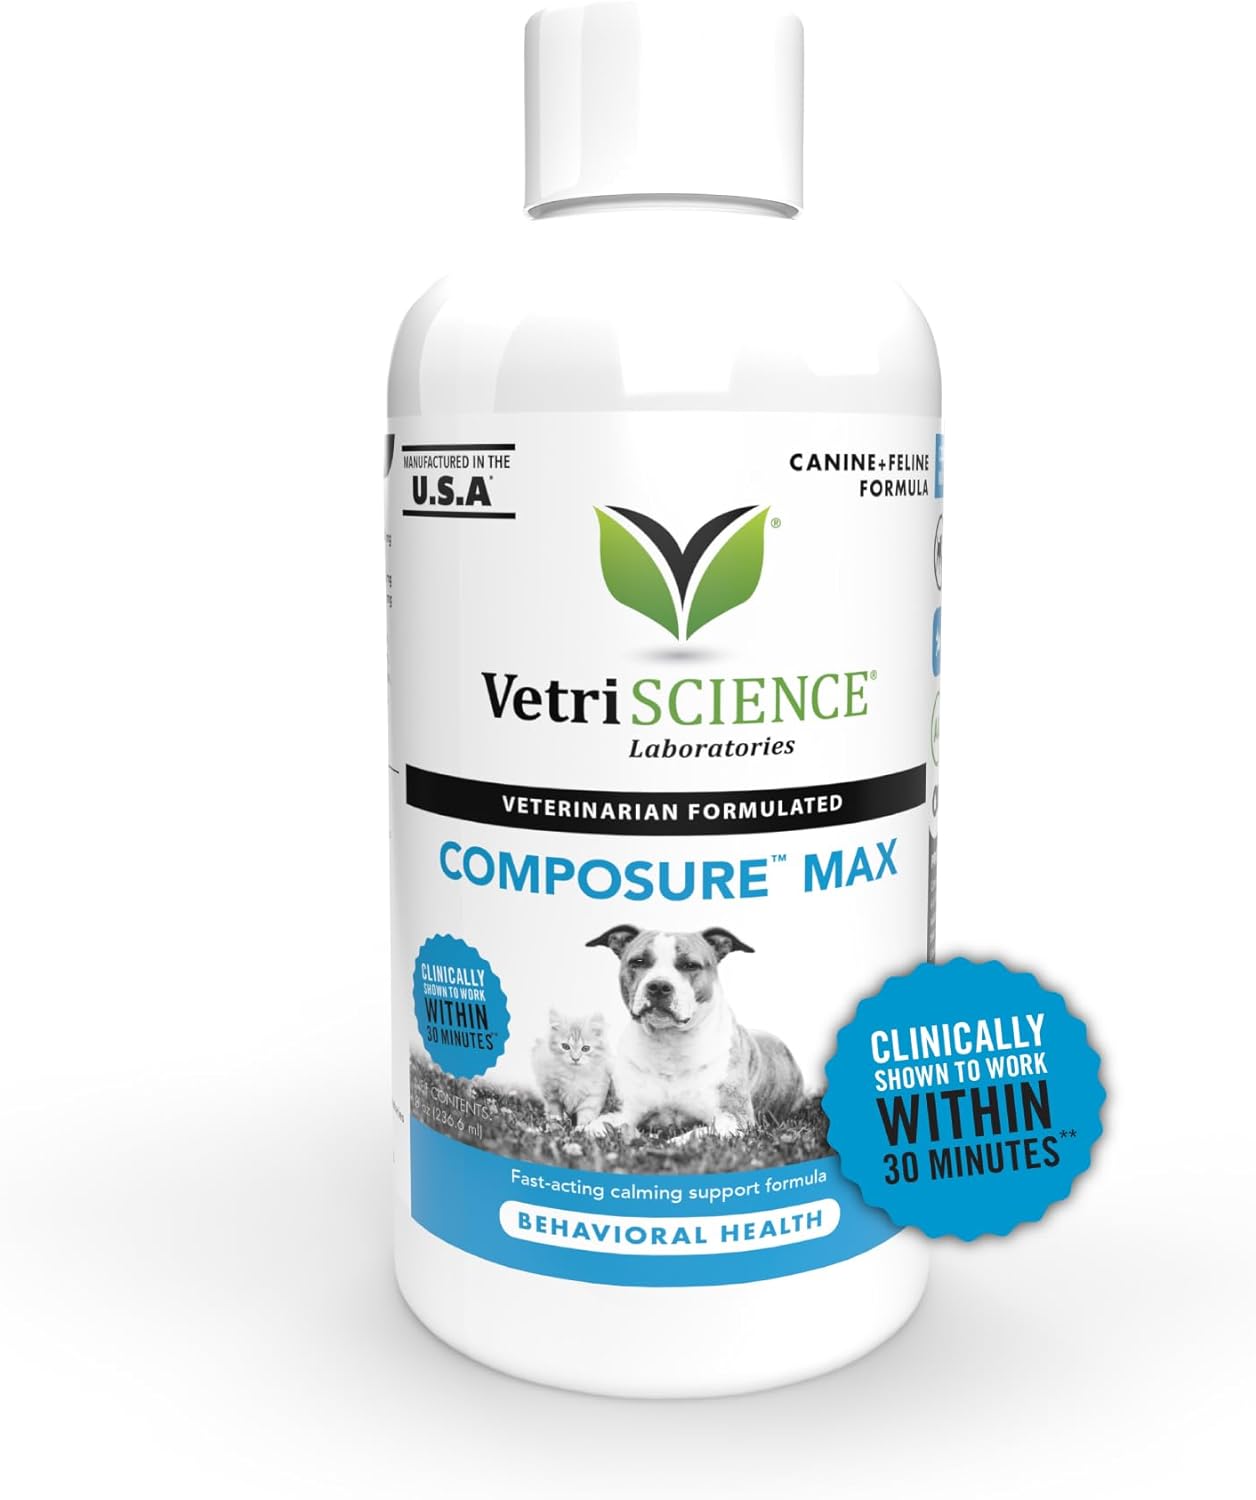 VetriScience Composure Max Liquid Formula - Clinically Proven Dog Calming and Cat Calming Supplement with Colostrum, L-Theanine & Vitamin B1 for Stress, Storms, Separation & More - 8 oz